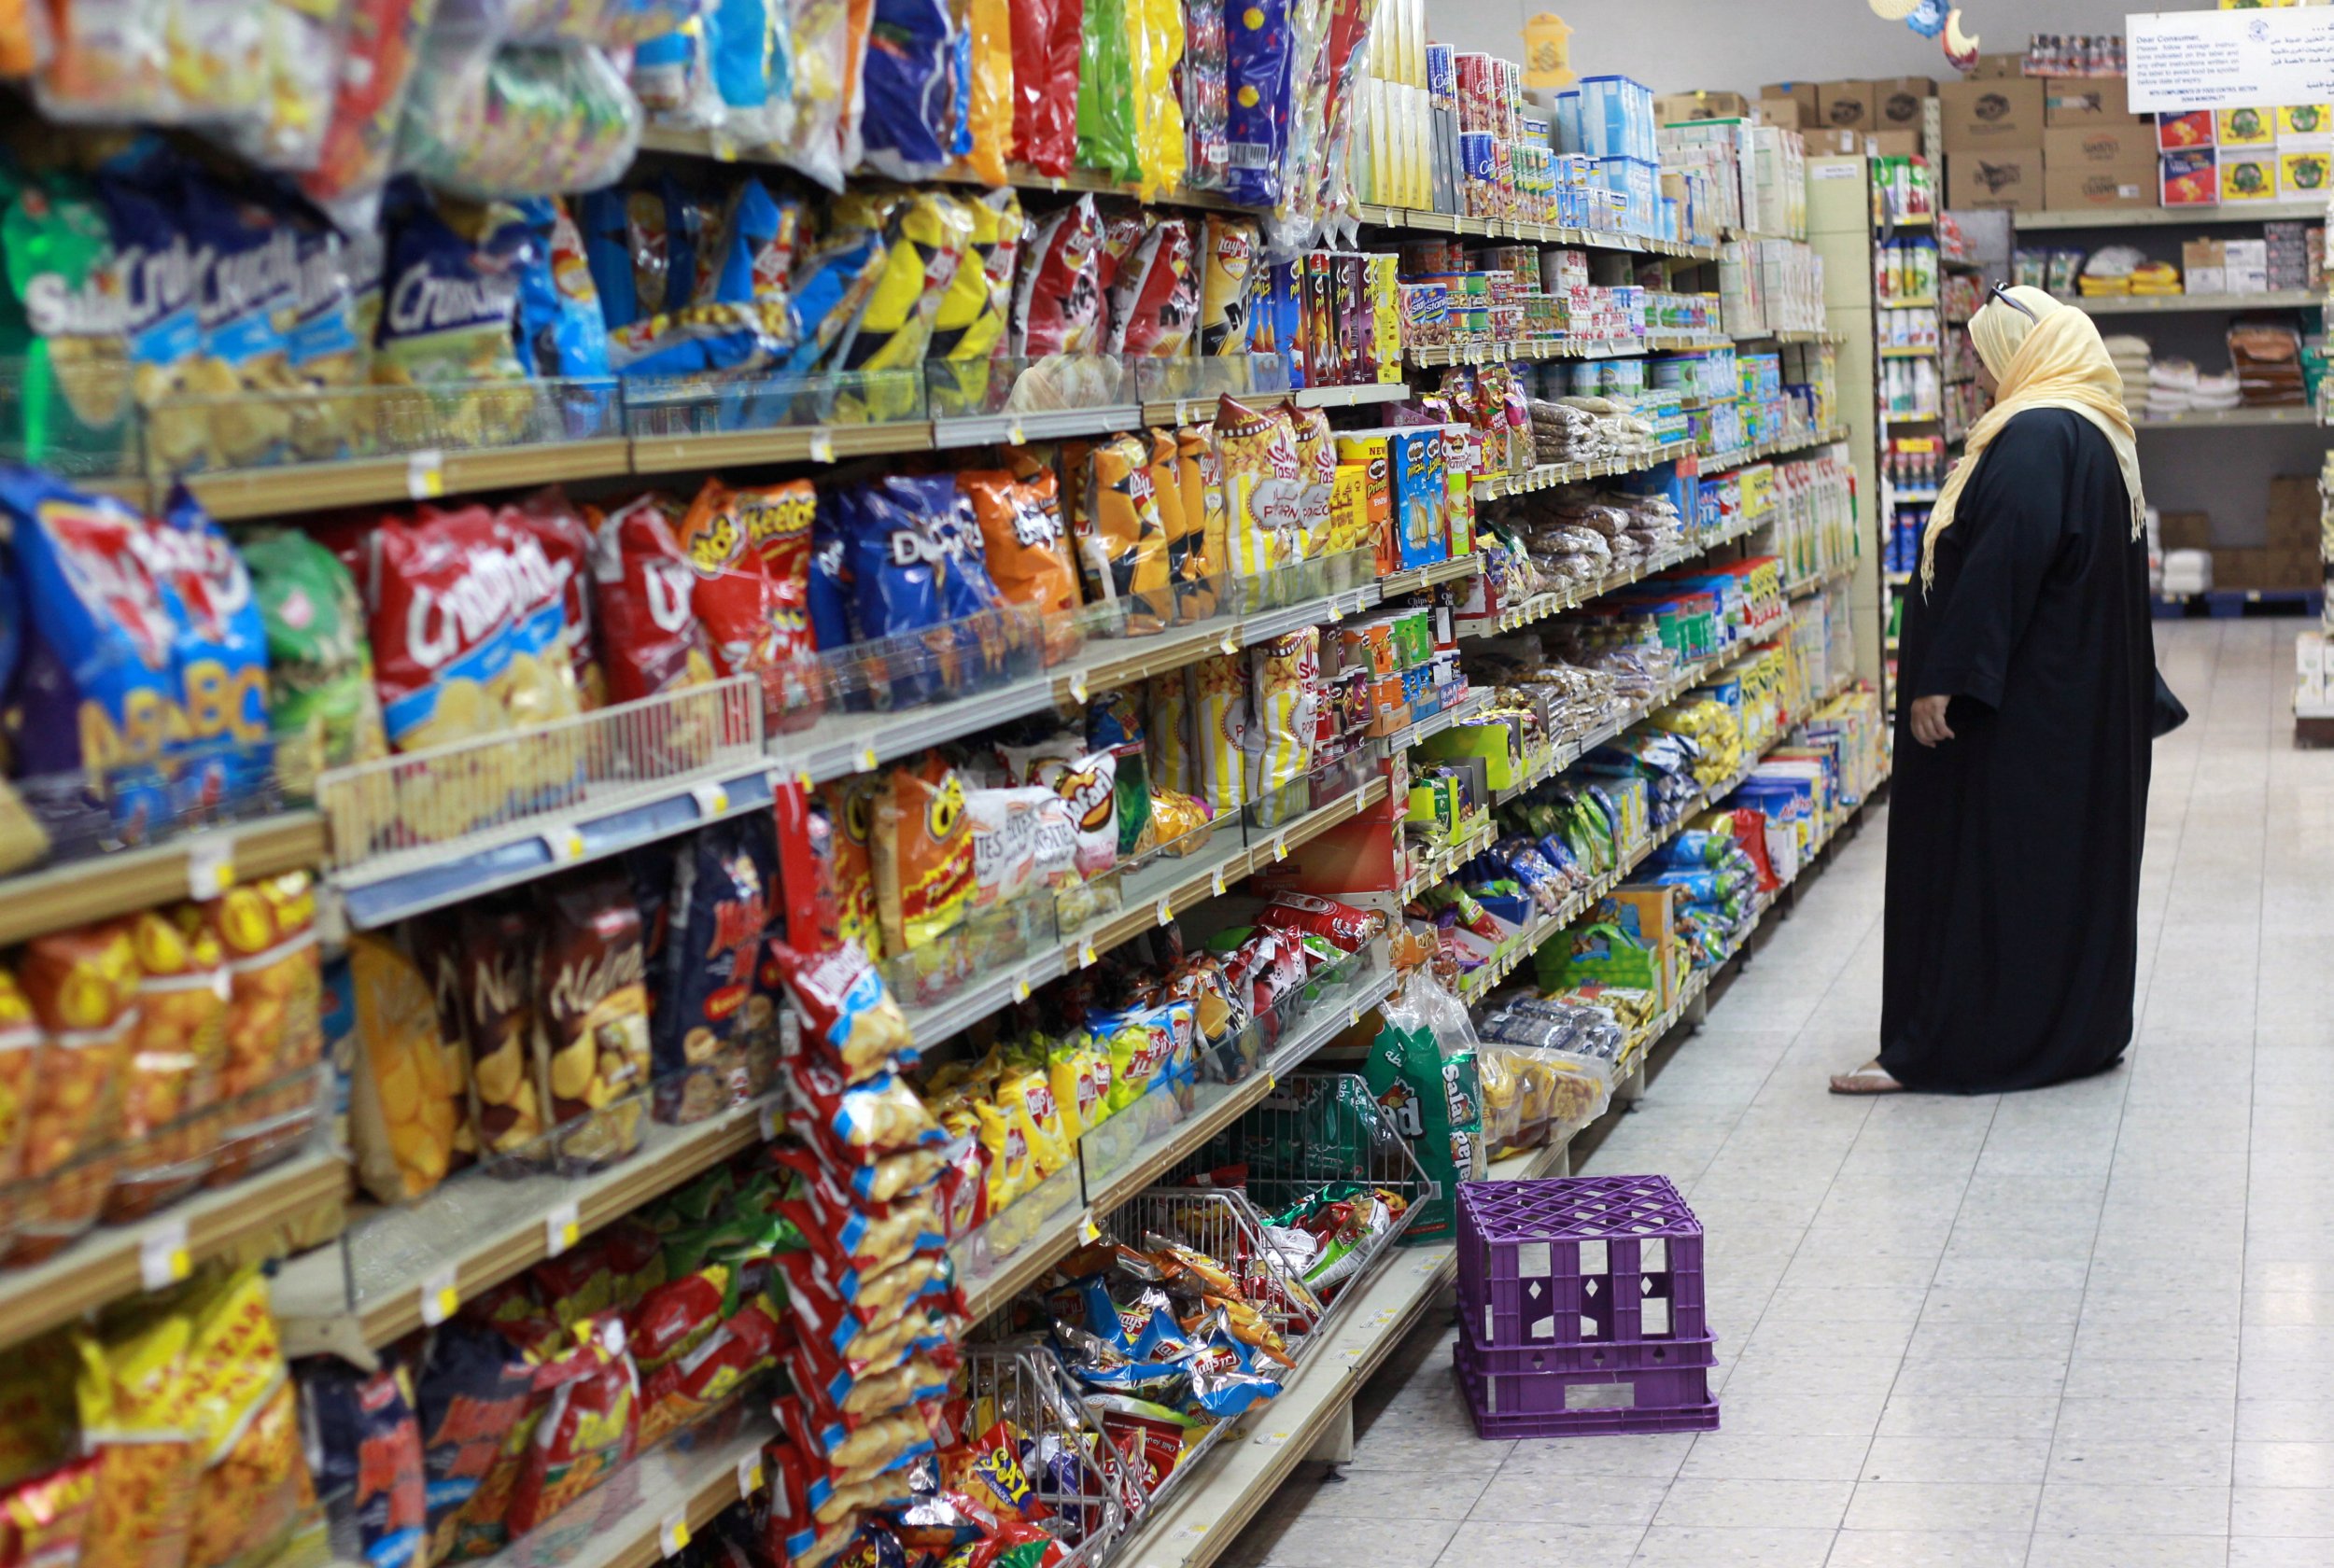 Supermarket in Doha, Qatar, after Gulf diplomatic crisis